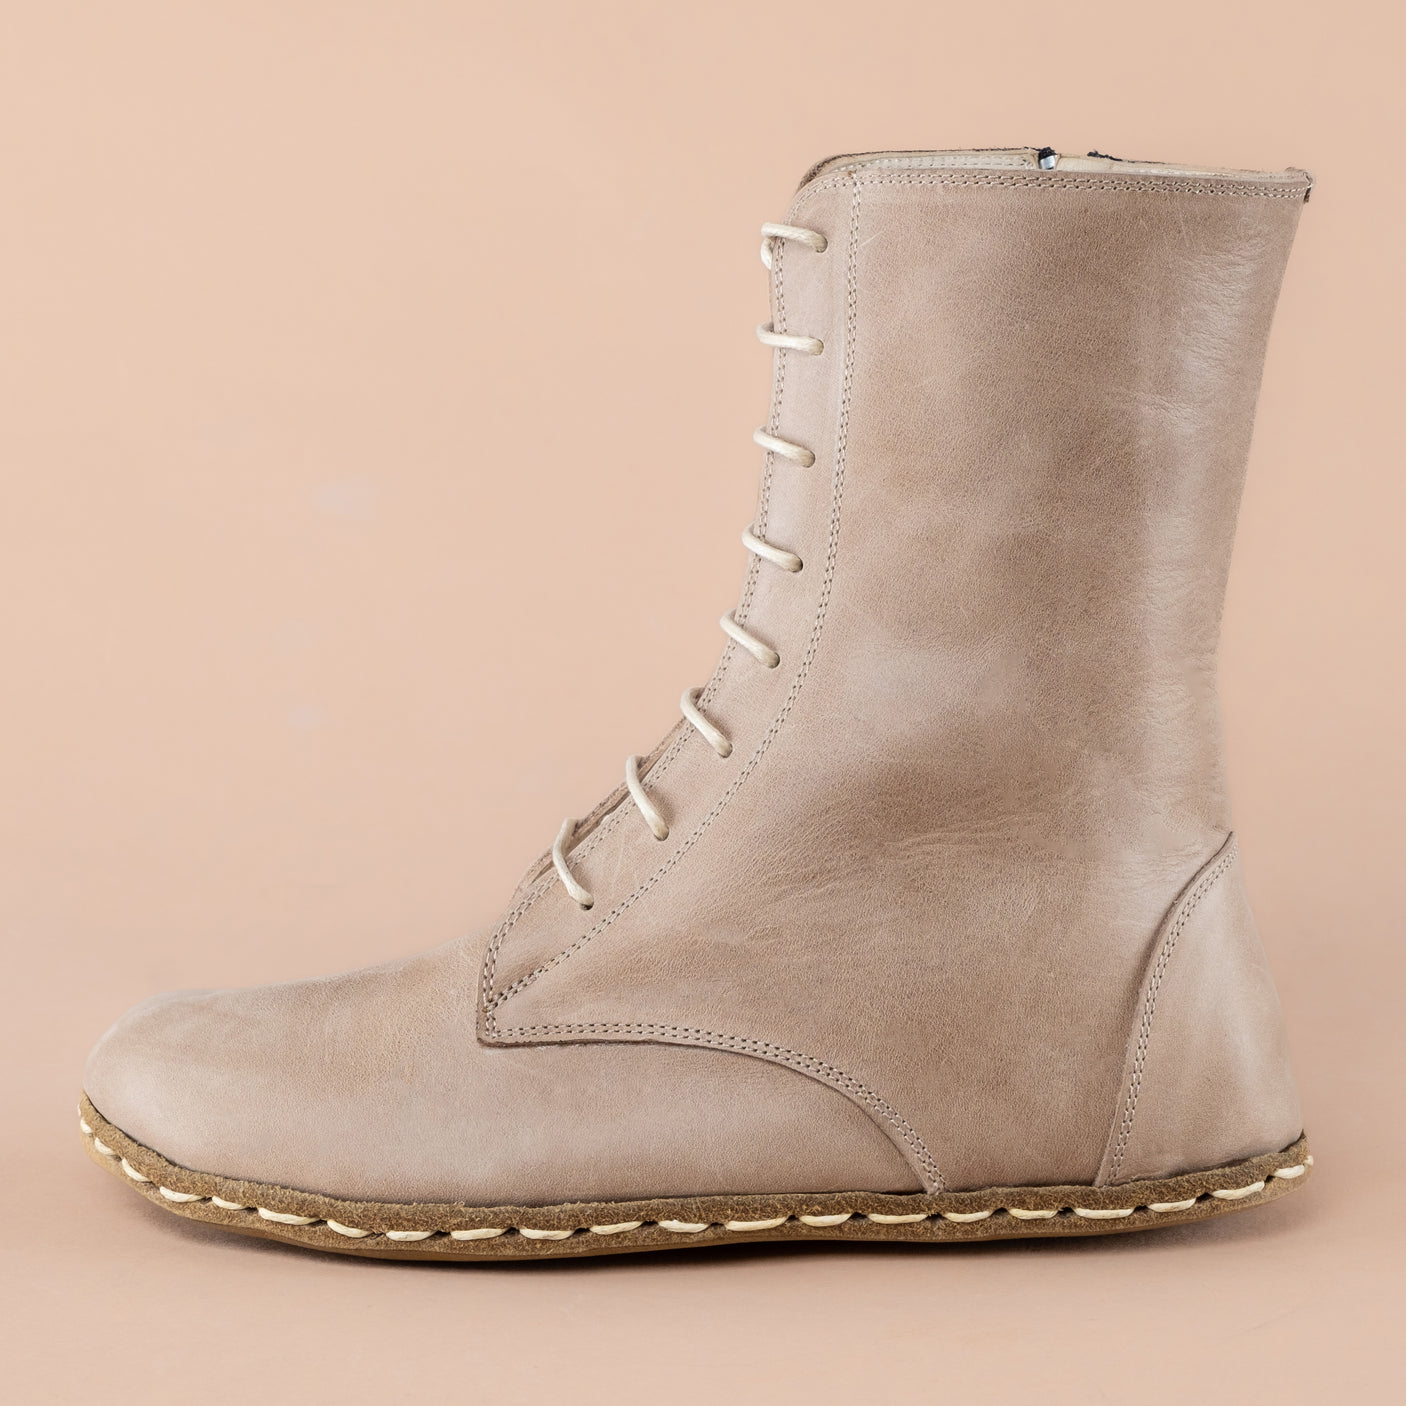 Women's Tan Barefoot High Ankle Boots